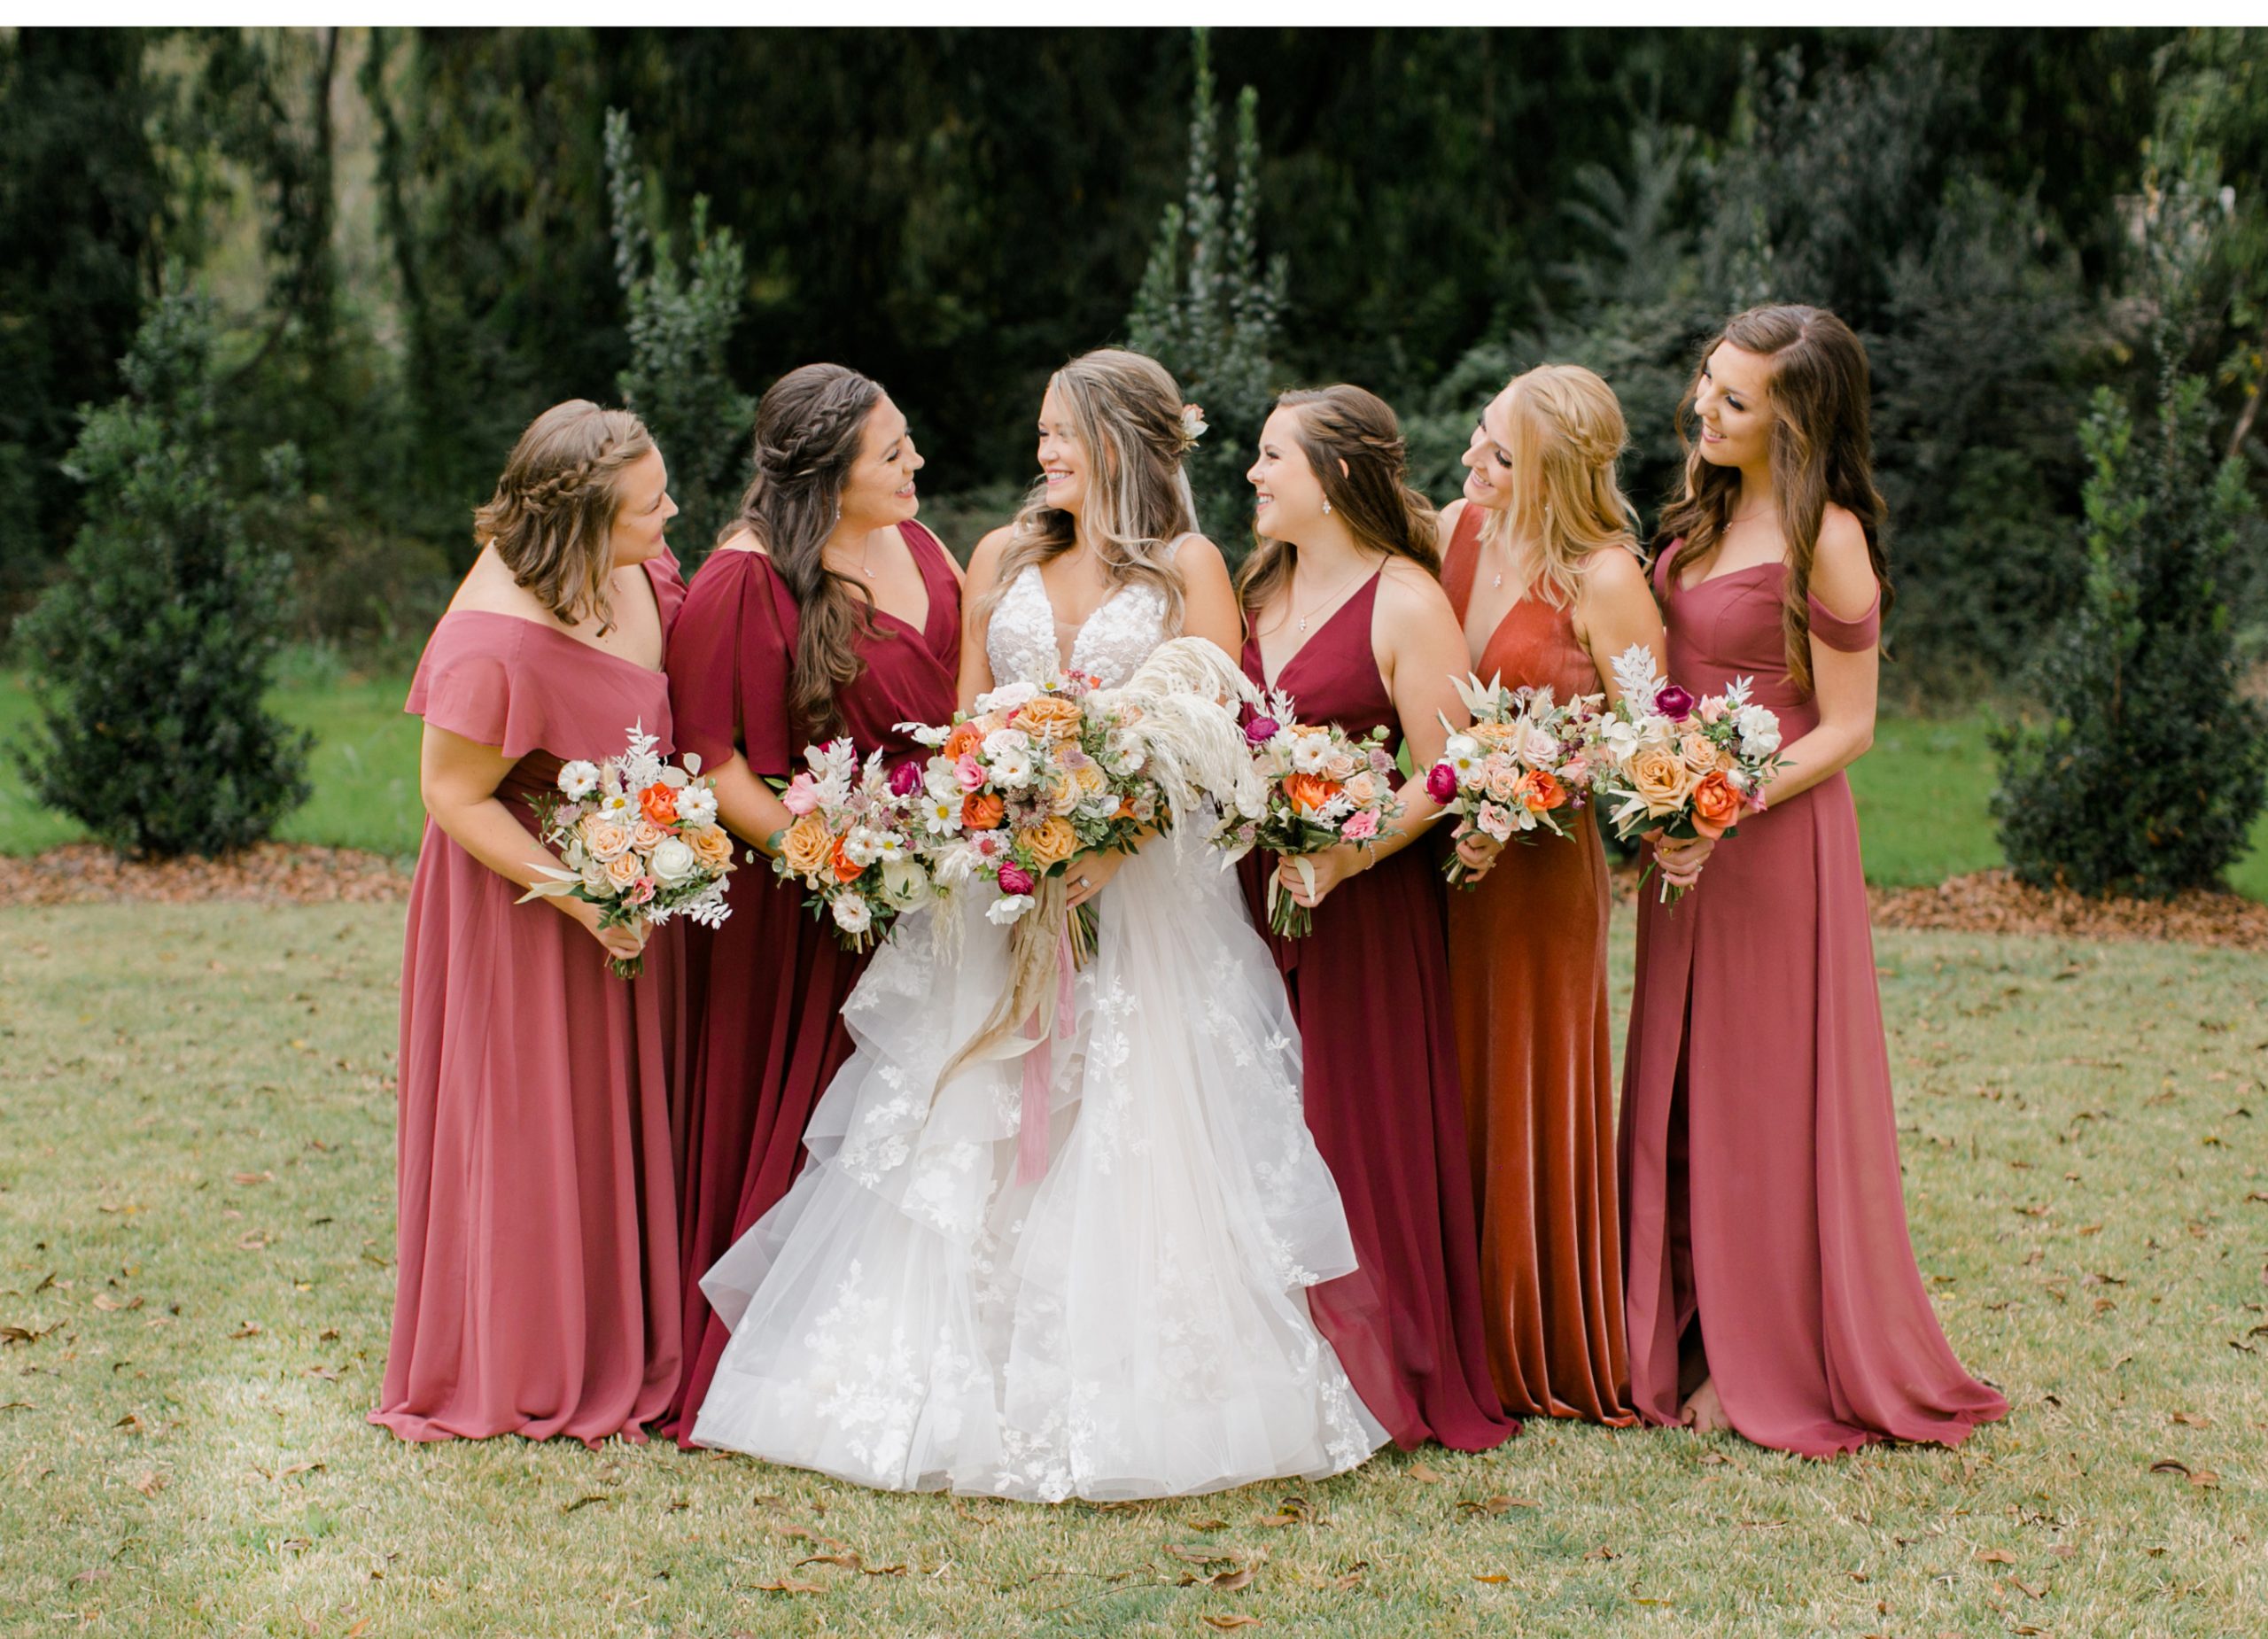 A popular and mutually agreeable new trend for bridal attendants is to choose dresses that do not match in style or even necessarily in color. Bridesmaids can wear dresses they like and that they are likely to wear again. Touchable fabrics and flattering colors make each one feel beautiful.  Sydney Thompson, Hannah Link, Bride Katherine Garrett, Maid of Honor Caroline Kammer, Lexie Barr, and Megan Garrett. The bridesmaid dresses were sourced from Bella Bridesmaid.